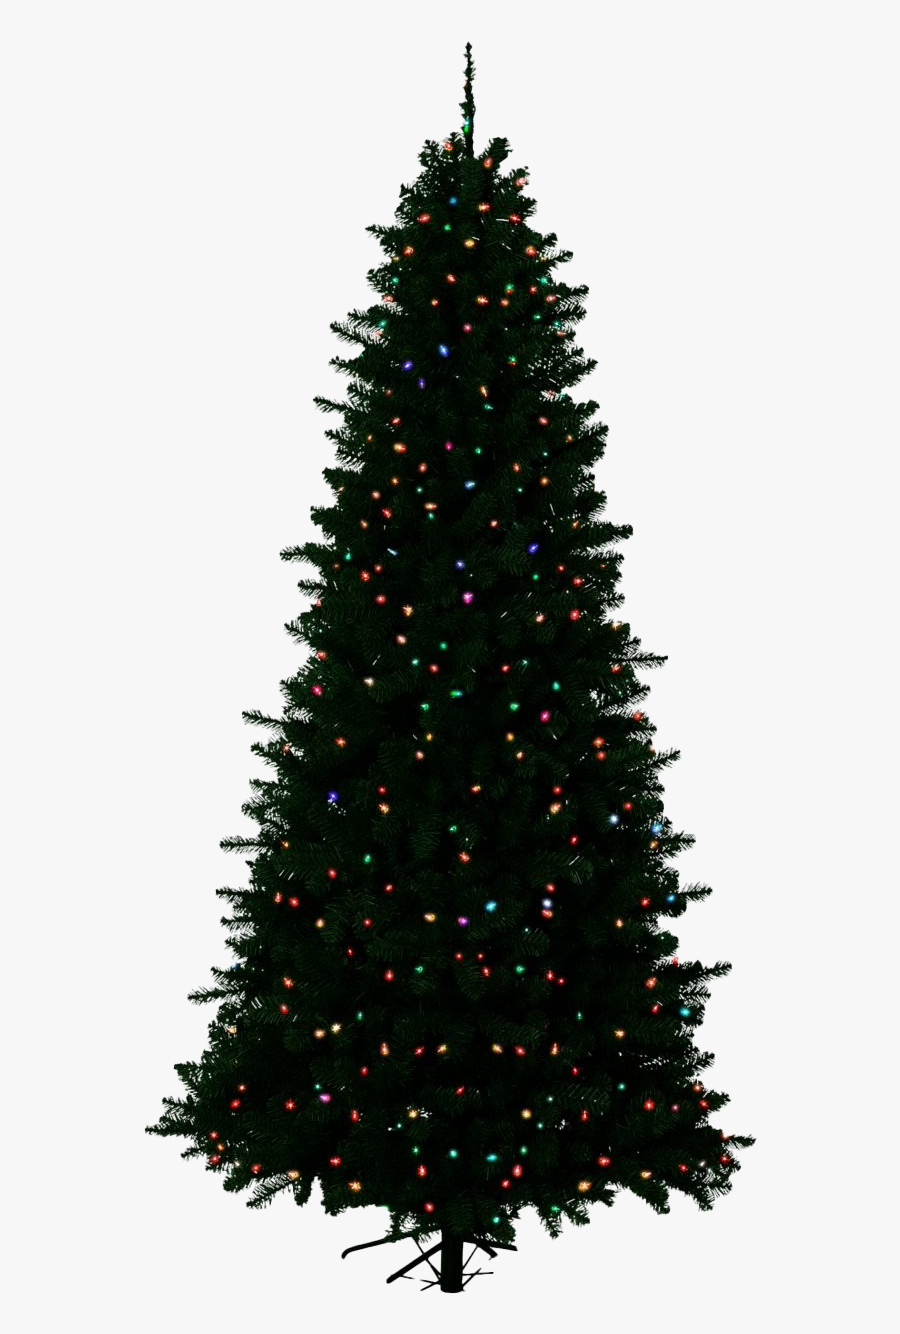 Artificial Christmas Tree Png Clipart - Artificial Christmas Trees Png, Transparent Clipart